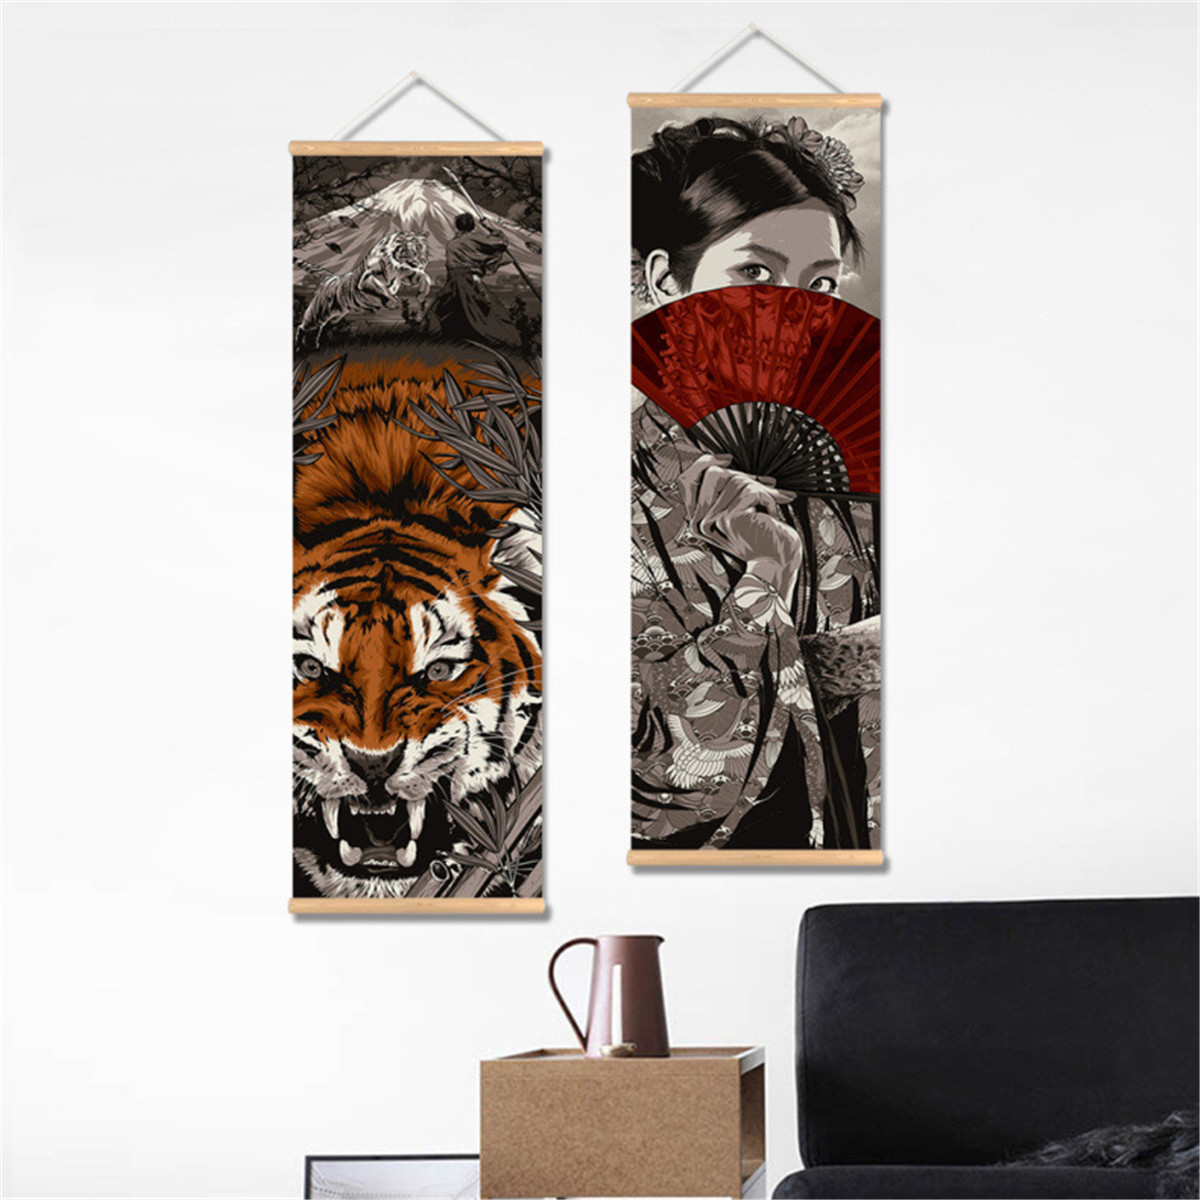 20x60cm-HD-Ukiyoe-Canvas-Paintings-Wall-Art-Poster-Hanging-Picture-Home-Decor-1440186